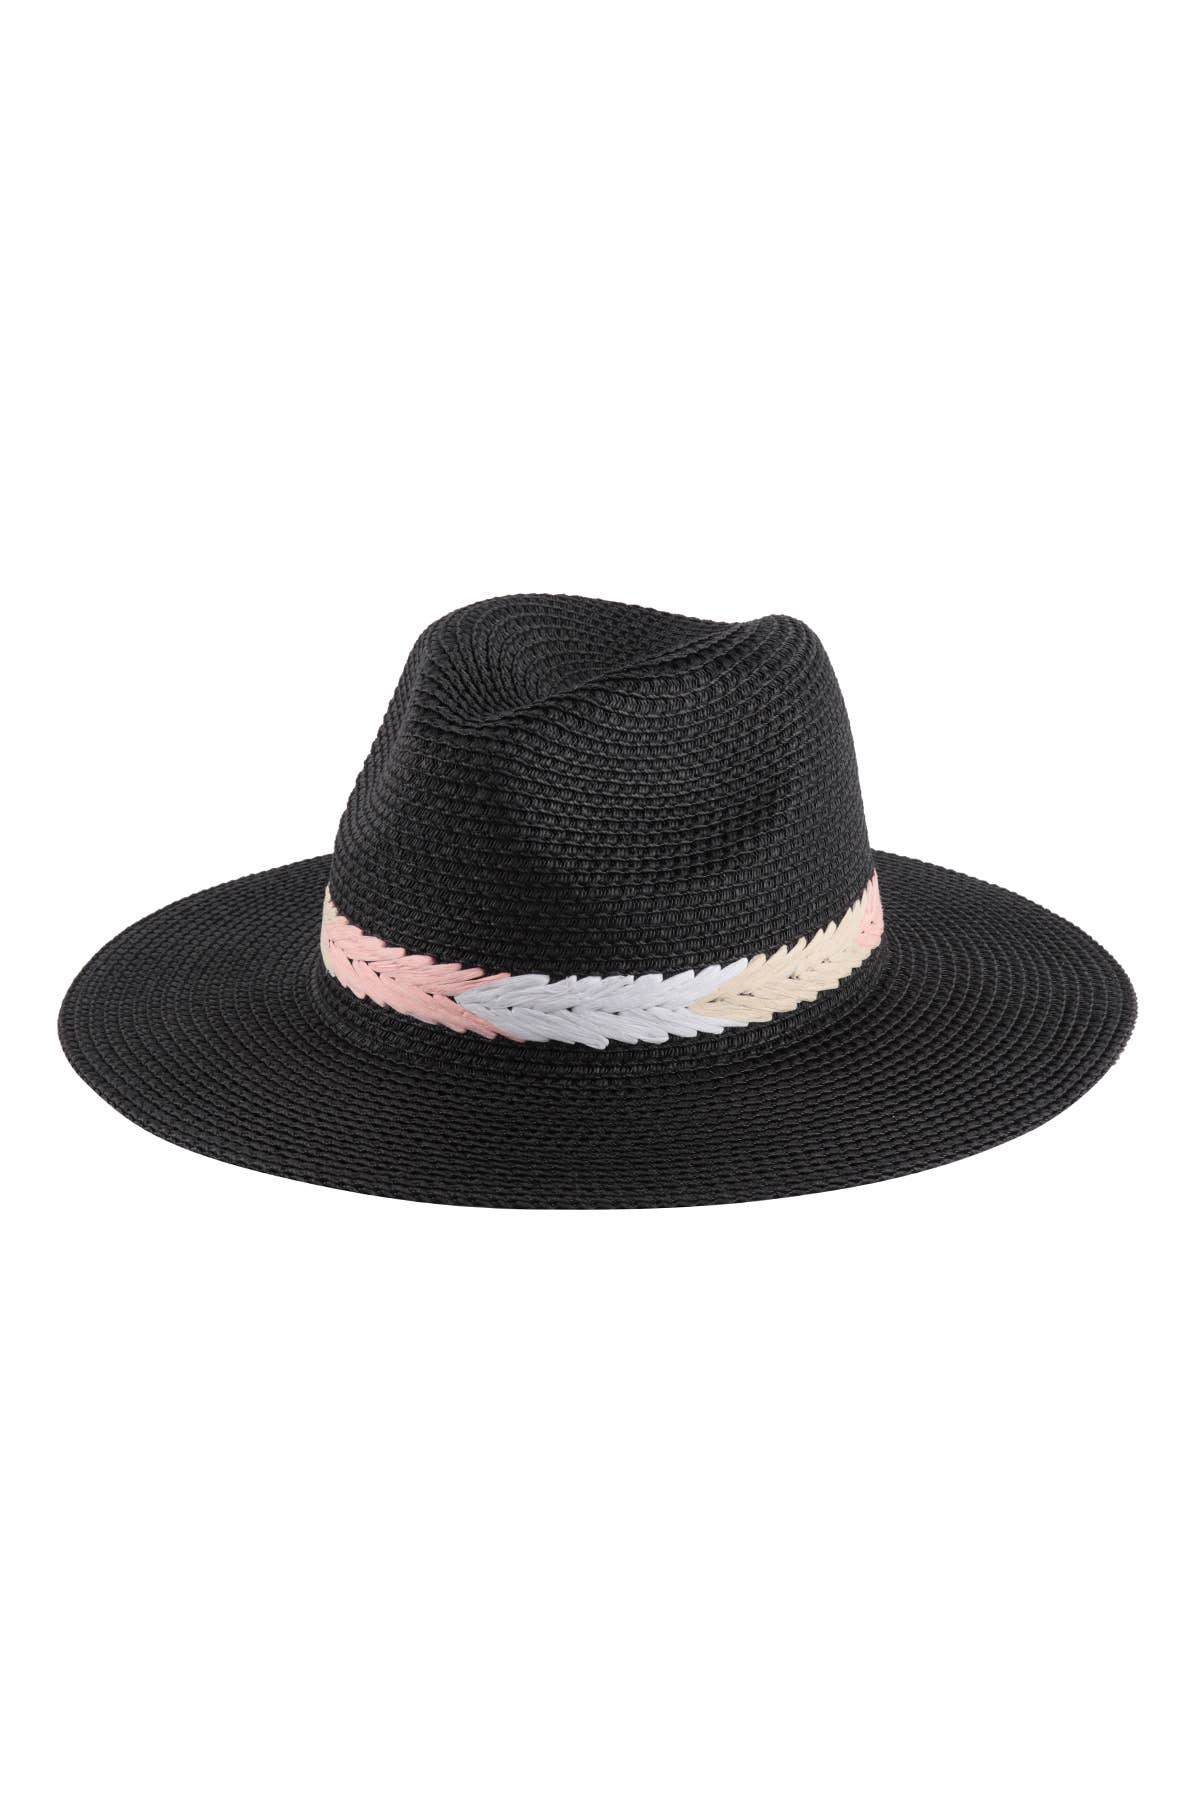 PANAMA BRIM SUMMER HAT WITH BRAIDED STRIPE ACCENT  *CLEARANCE ITEM - FINAL SALE*